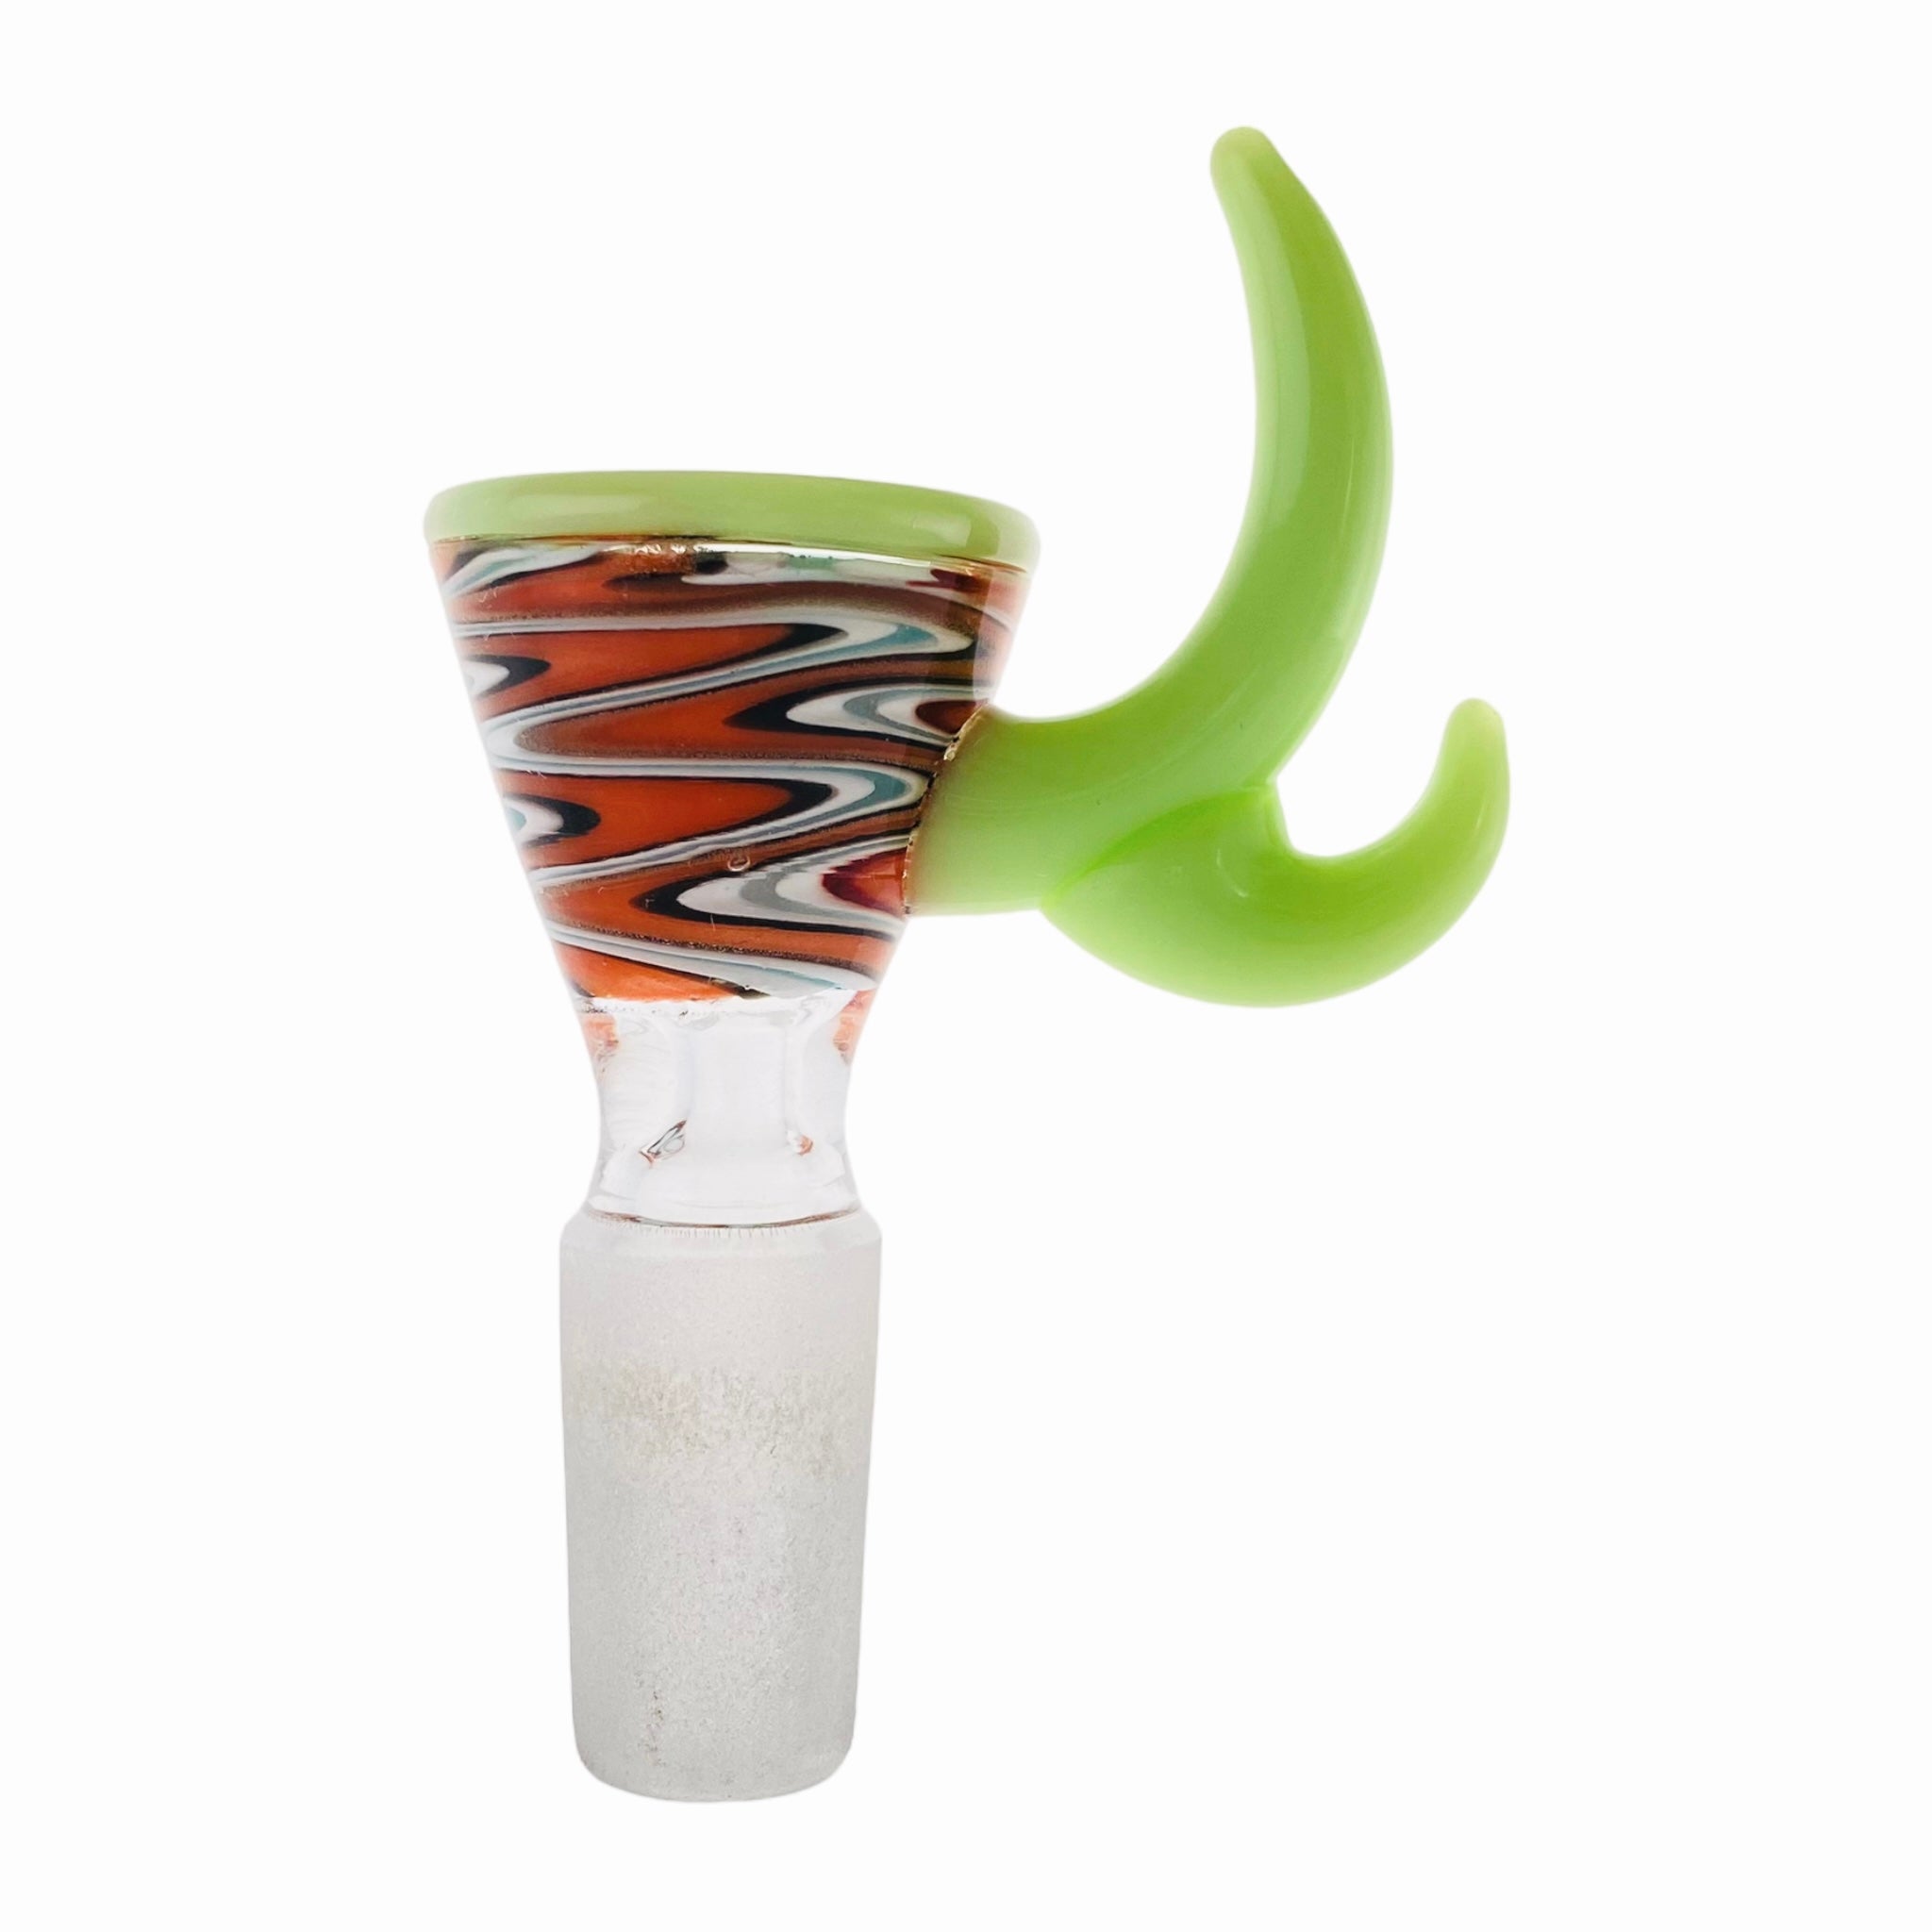 14mm Flower Bowl - Fire and Ice Wig Wag Bong Bowl Piece With Green Horn Handle